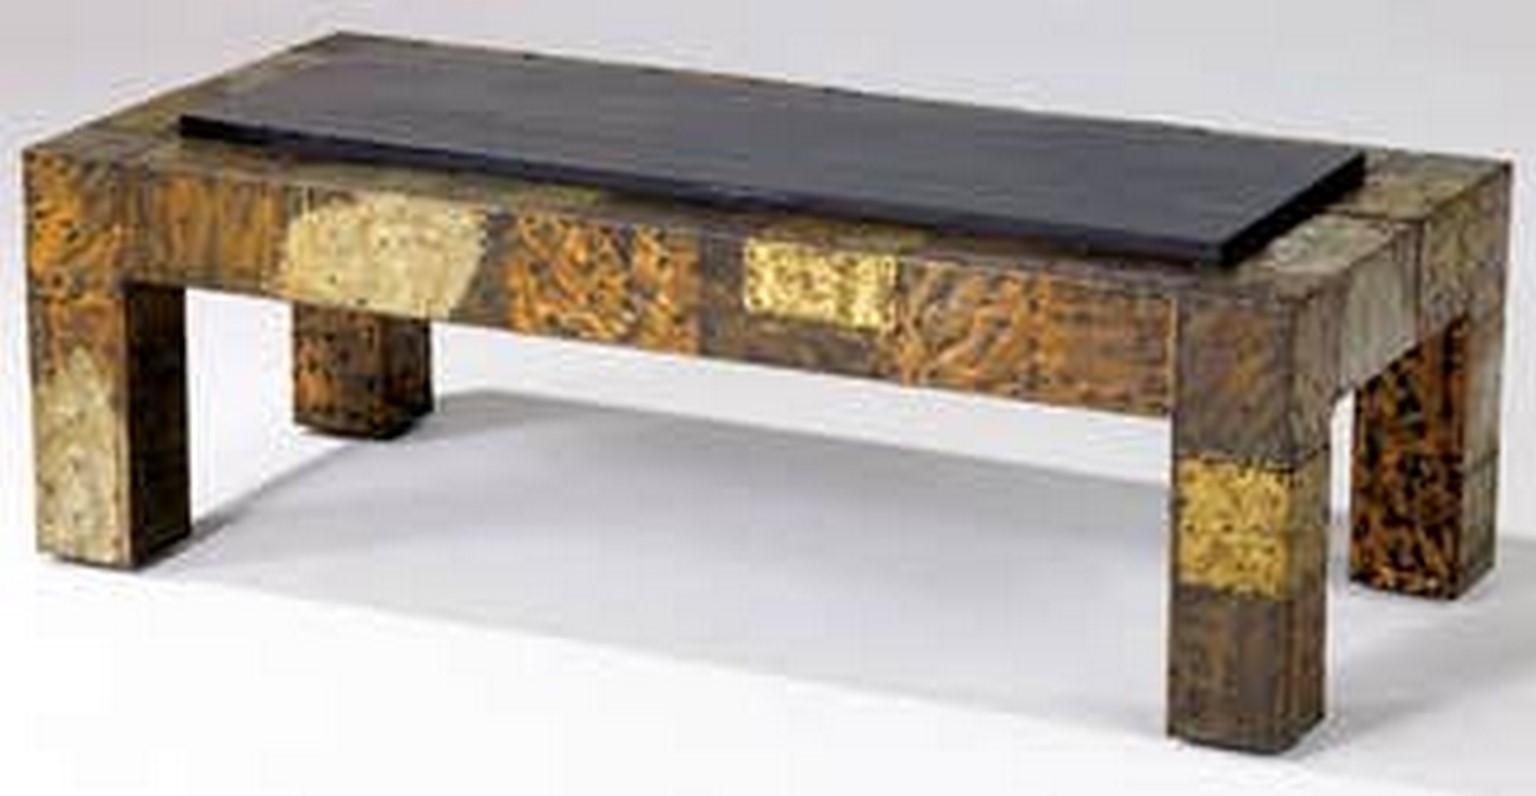 North American Mid-Century Modern Bronze Patchwork Coffee Table by Paul Evans